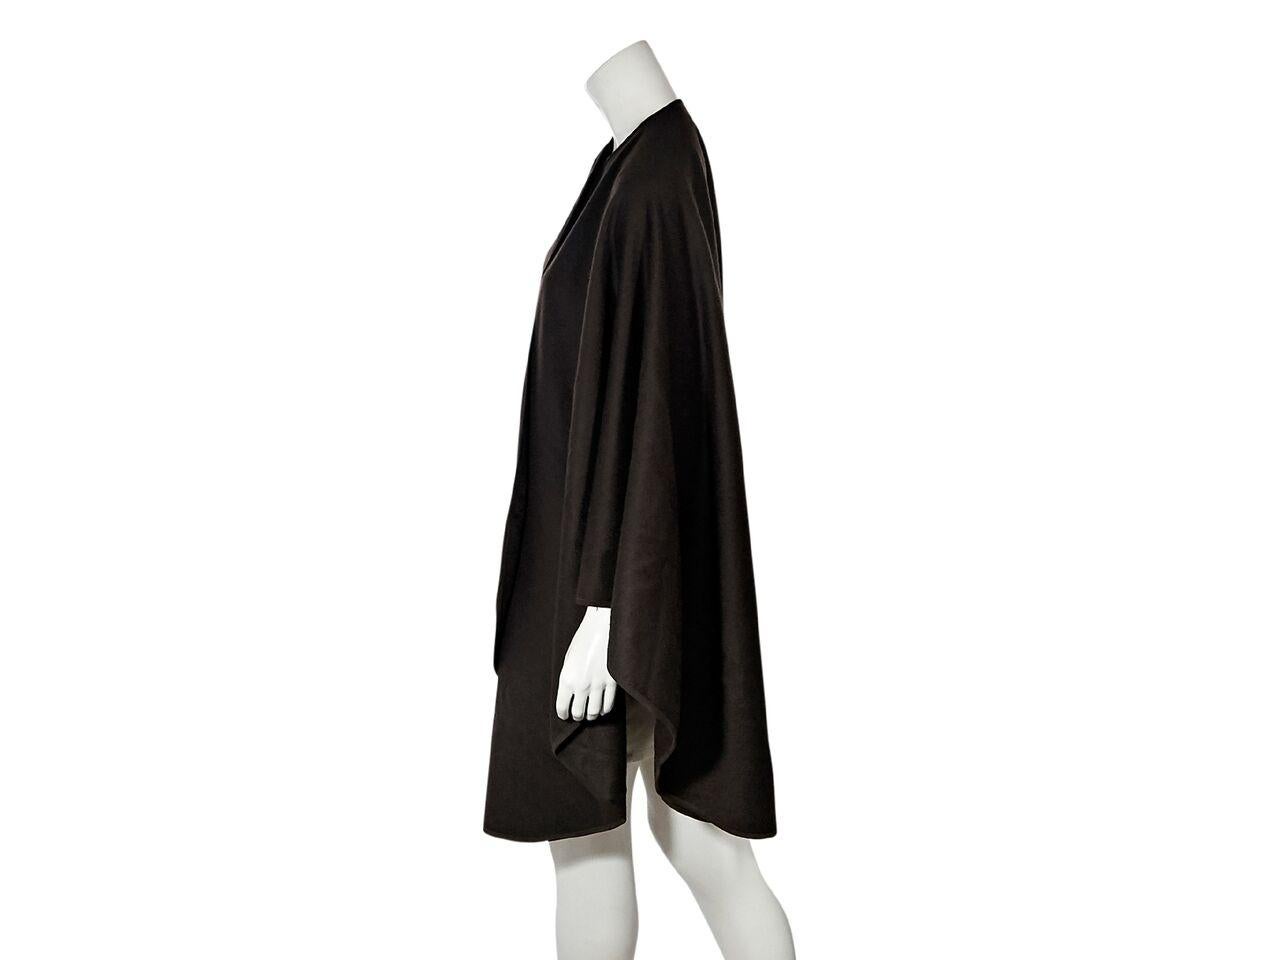 Product details:  Brown cashmere cape by Loro Piana for Bergdorf Goodman.  Trimmed with suede.  38